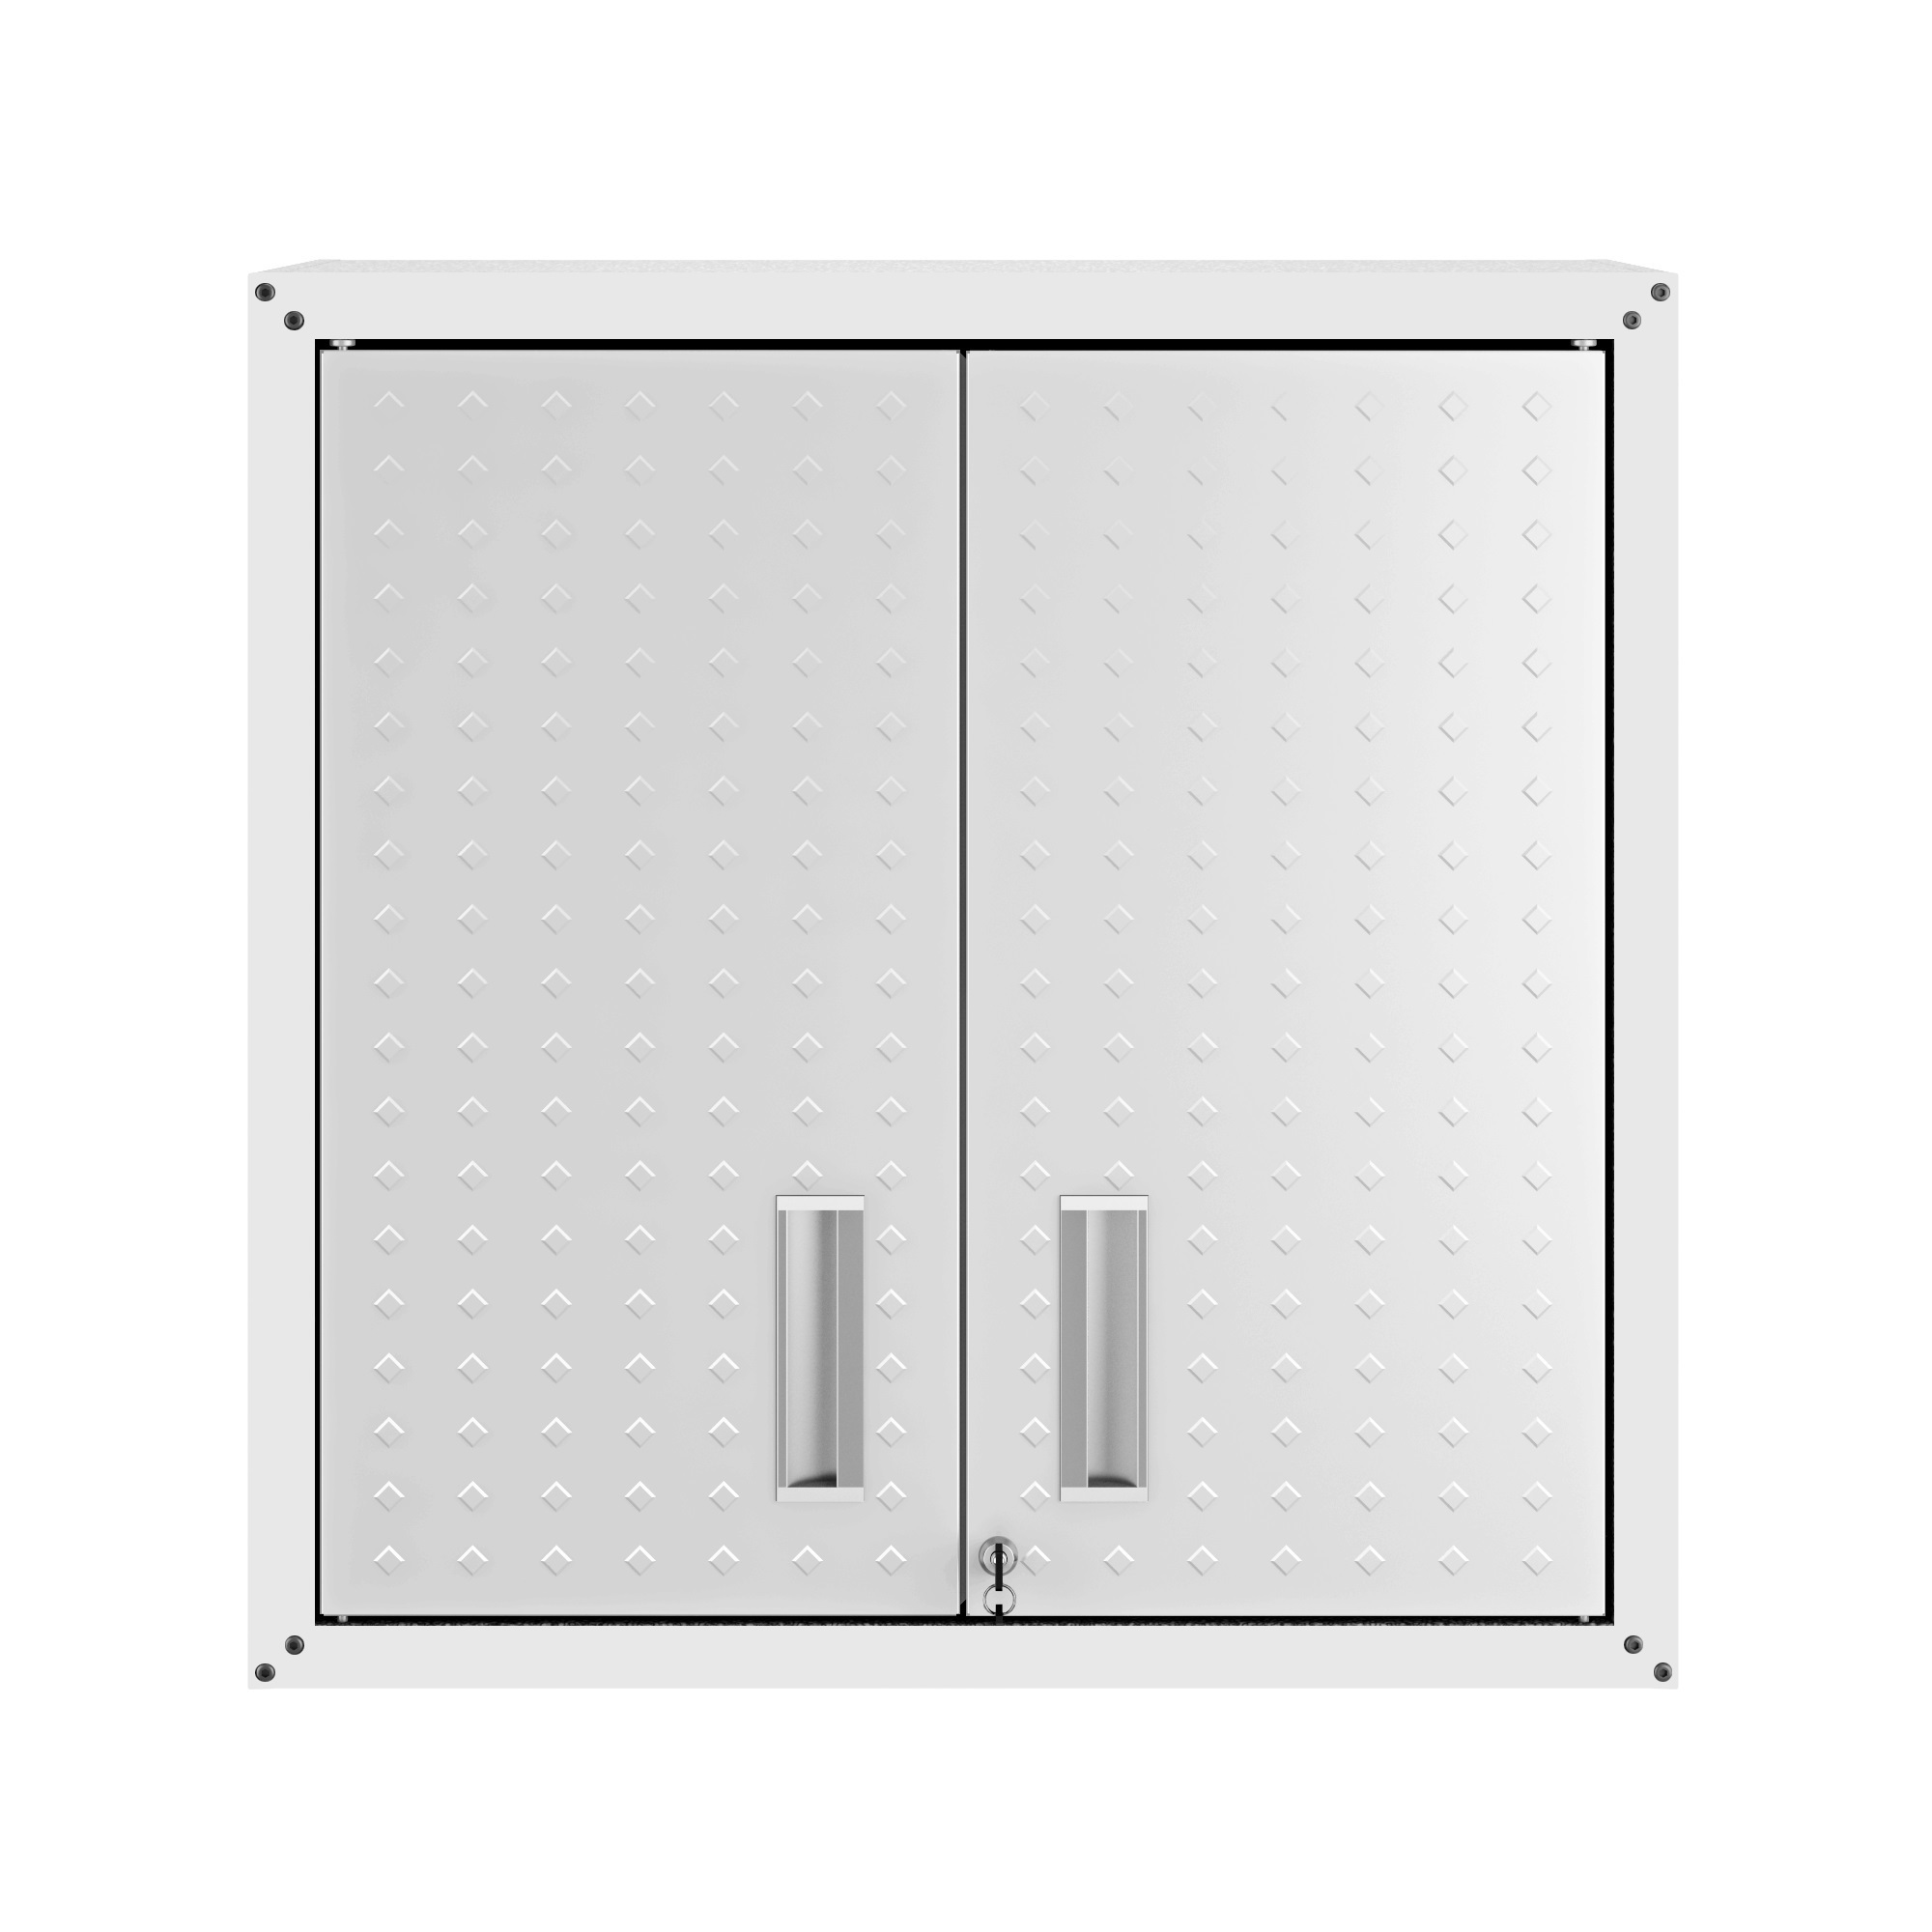 Manhattan Comfort, Fortress Floating Garage Cabinet in White, Height 30.3 in, Width 30 in, Color White, Model 5GMC